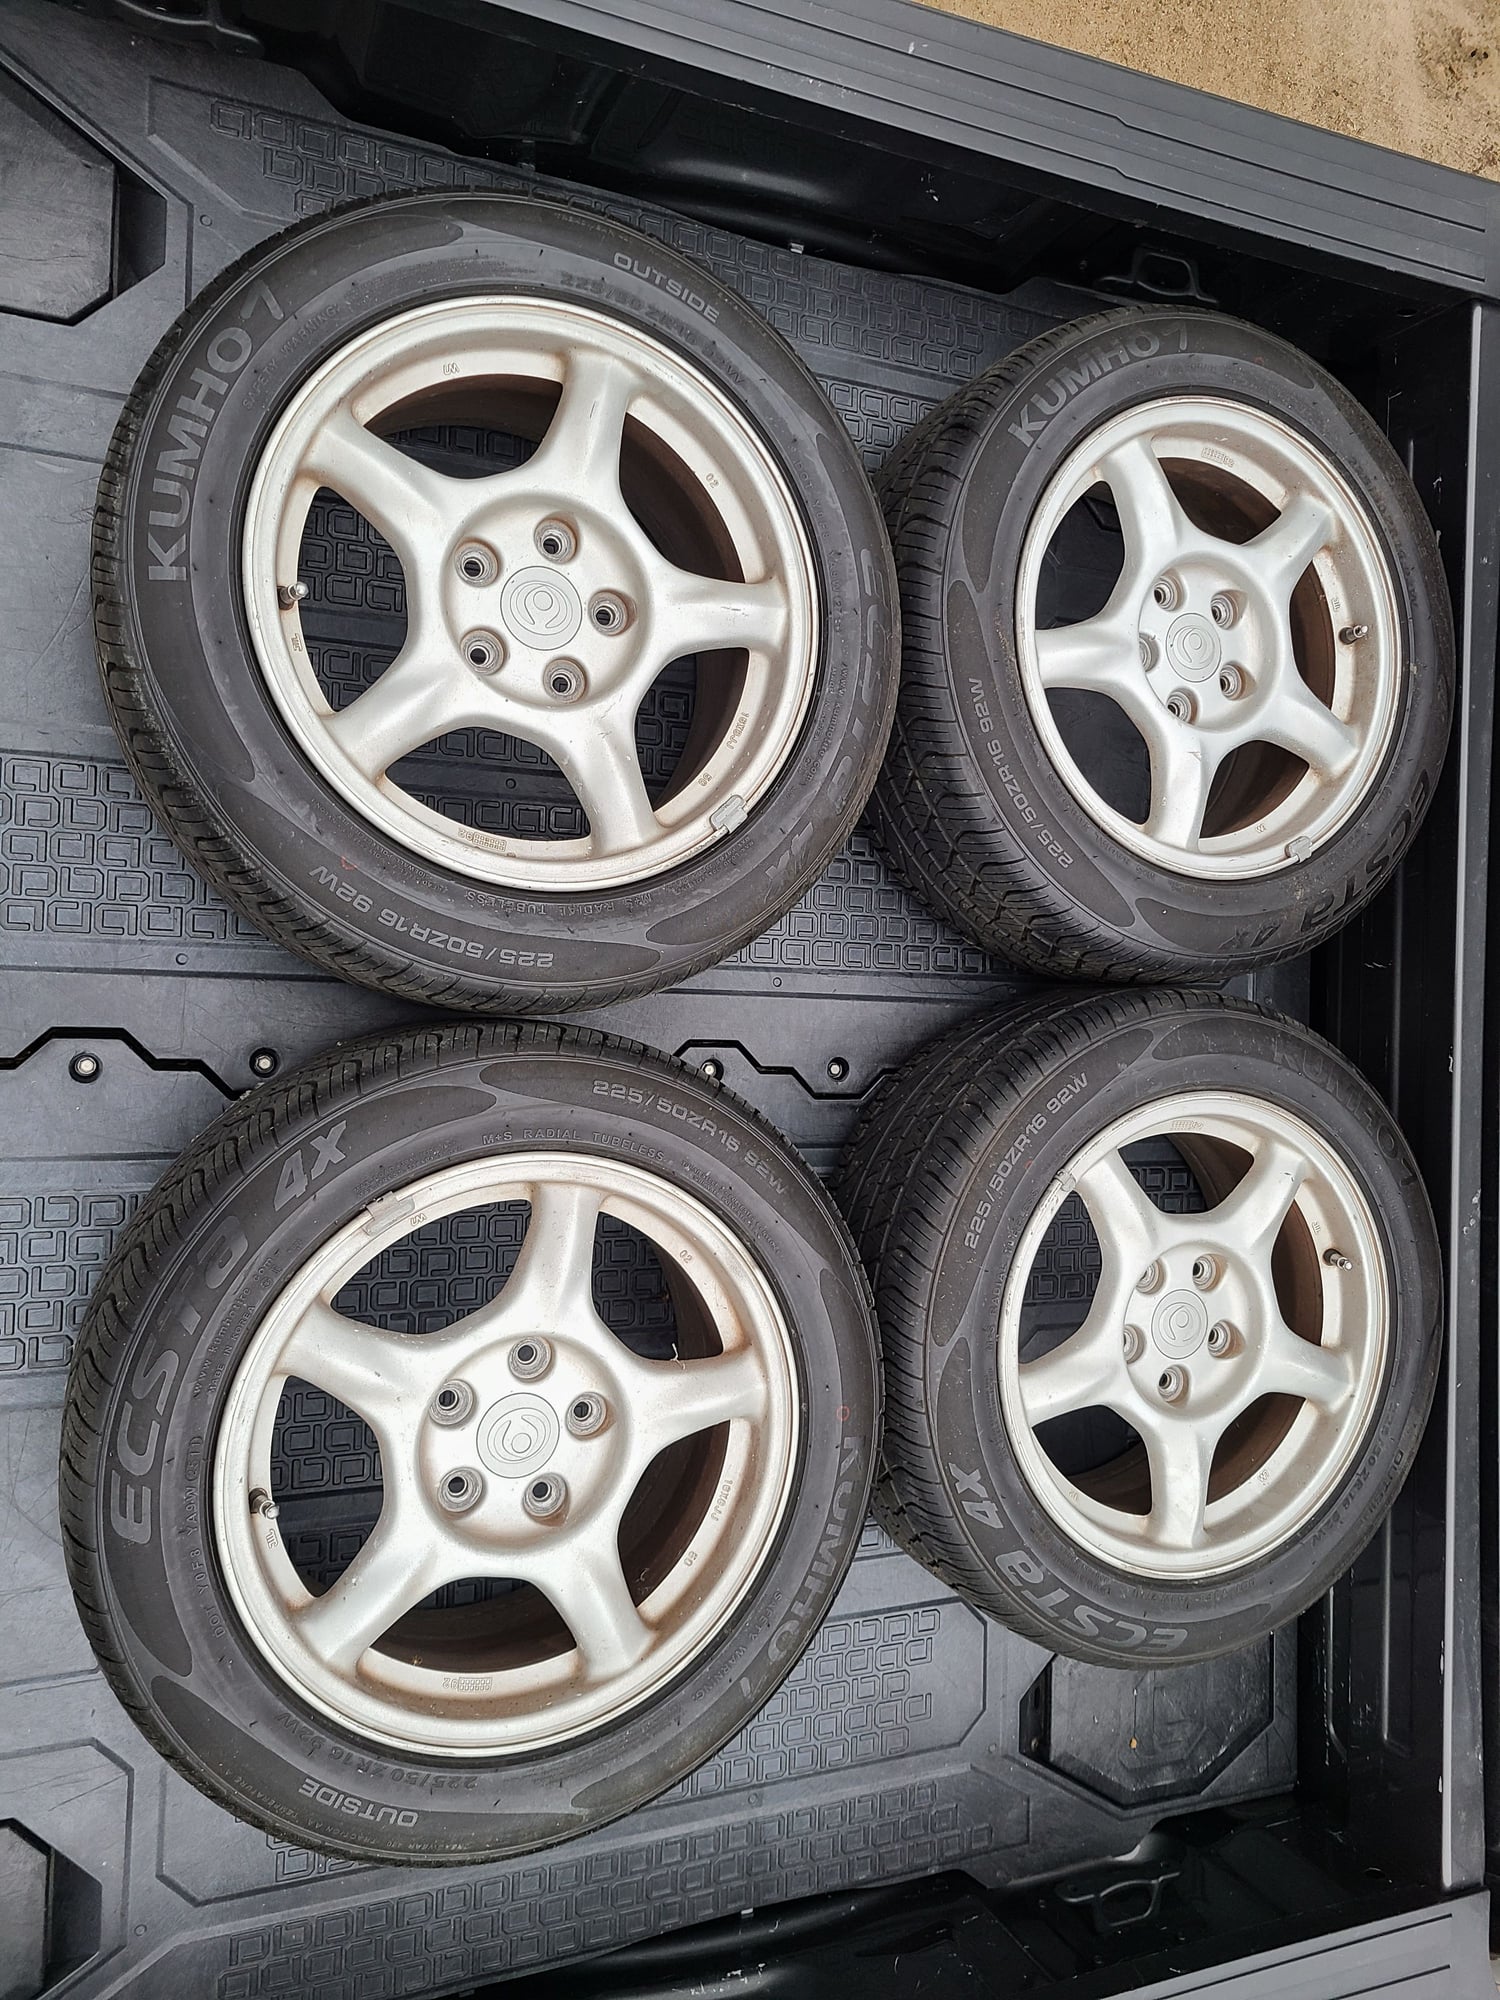 Wheels and Tires/Axles - Fd oem wheels - Used - 1993 Mazda RX-7 - Dallas, TX 75254, United States